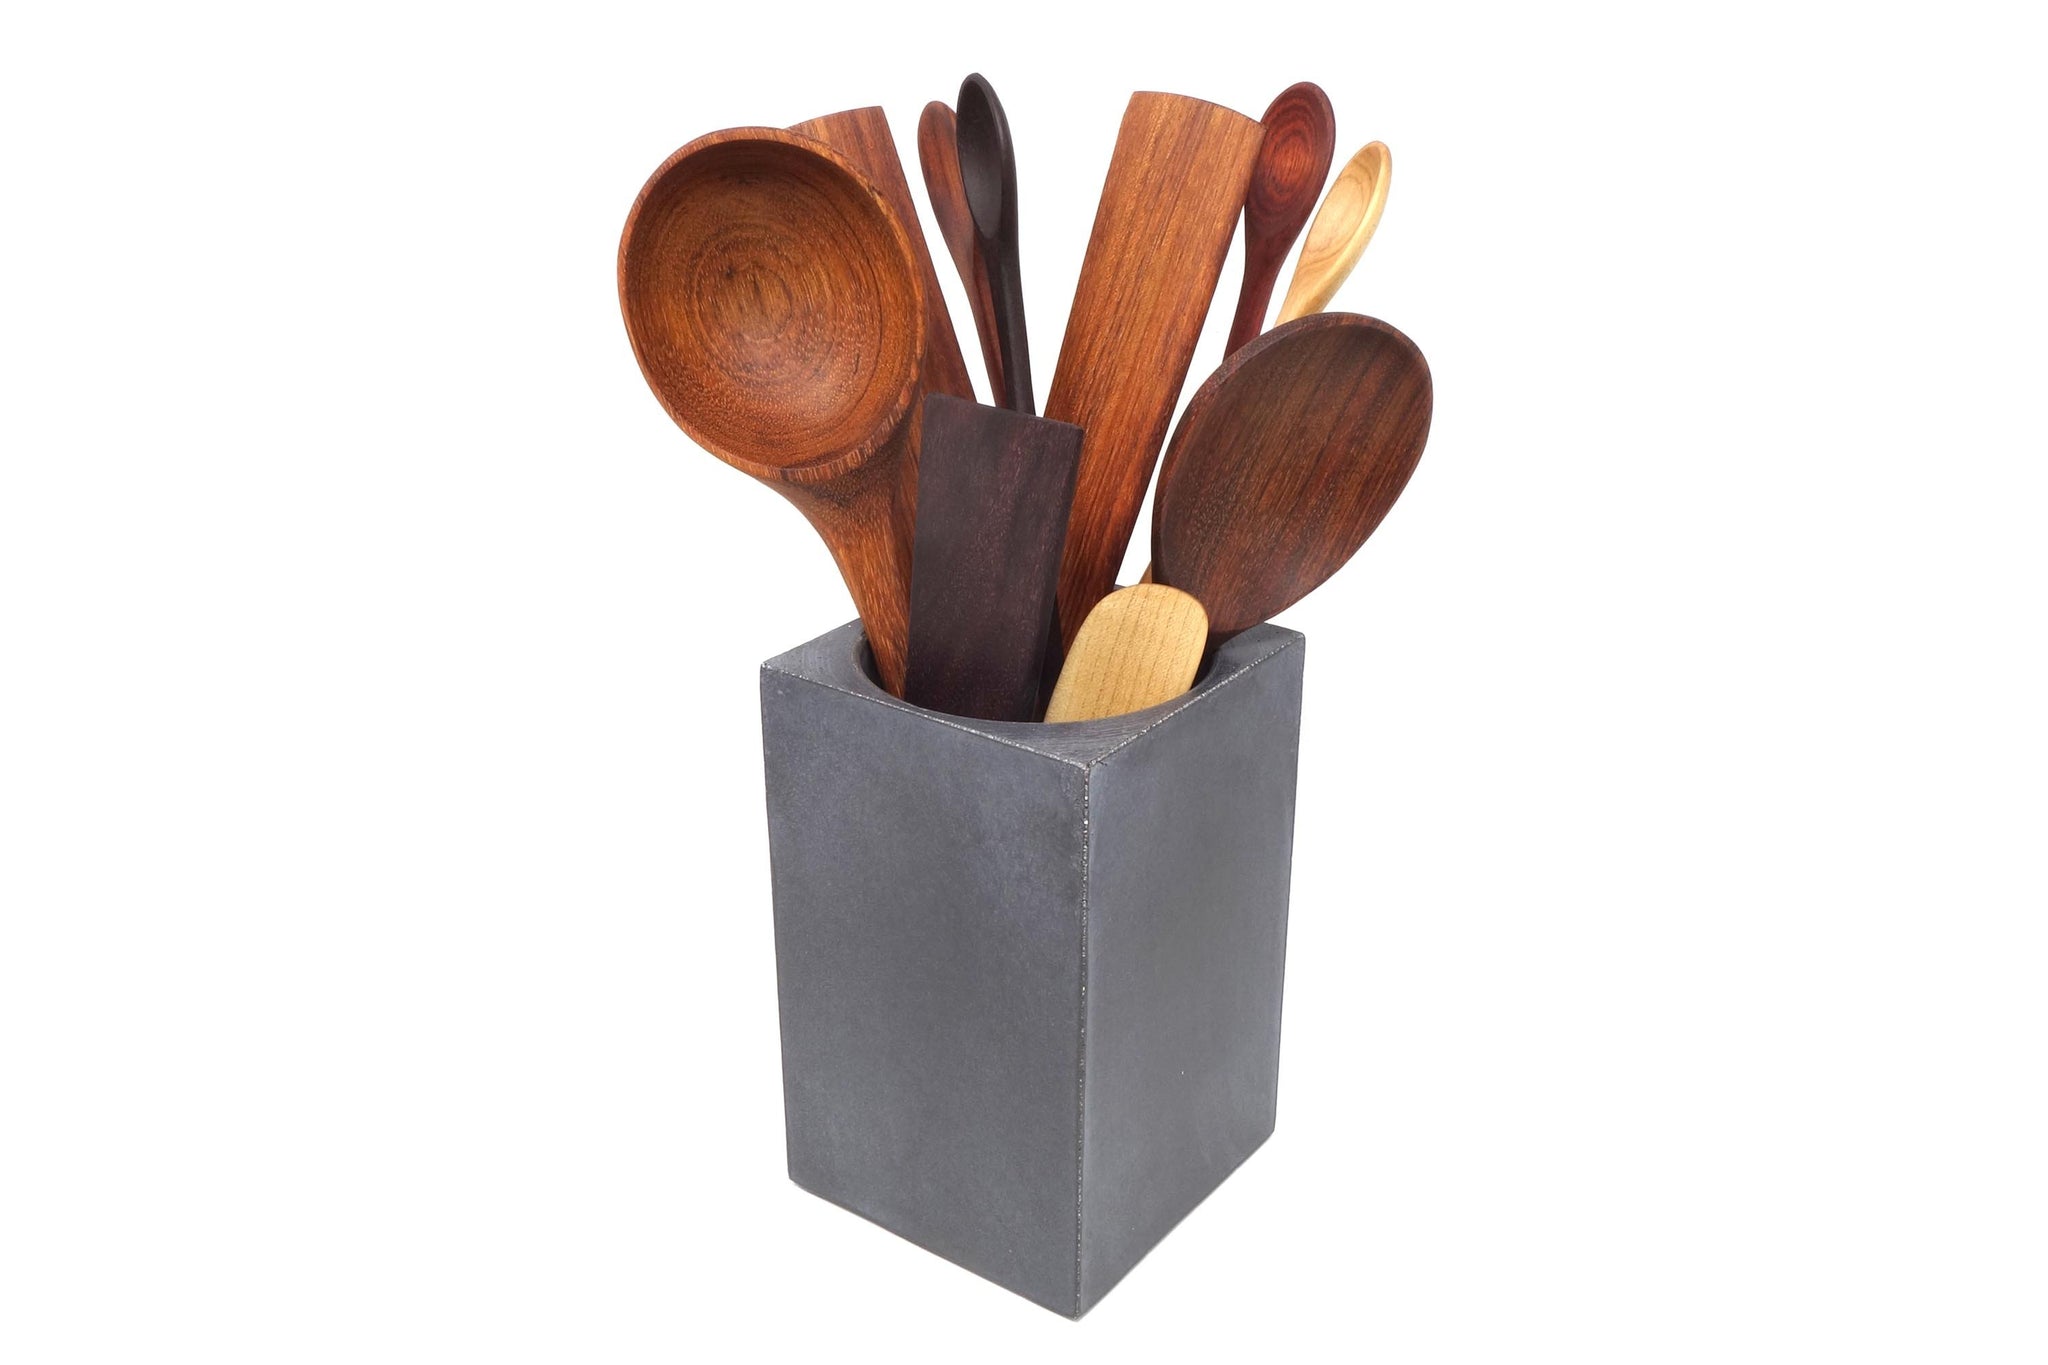 wooden spatula for cooking - Earlywood